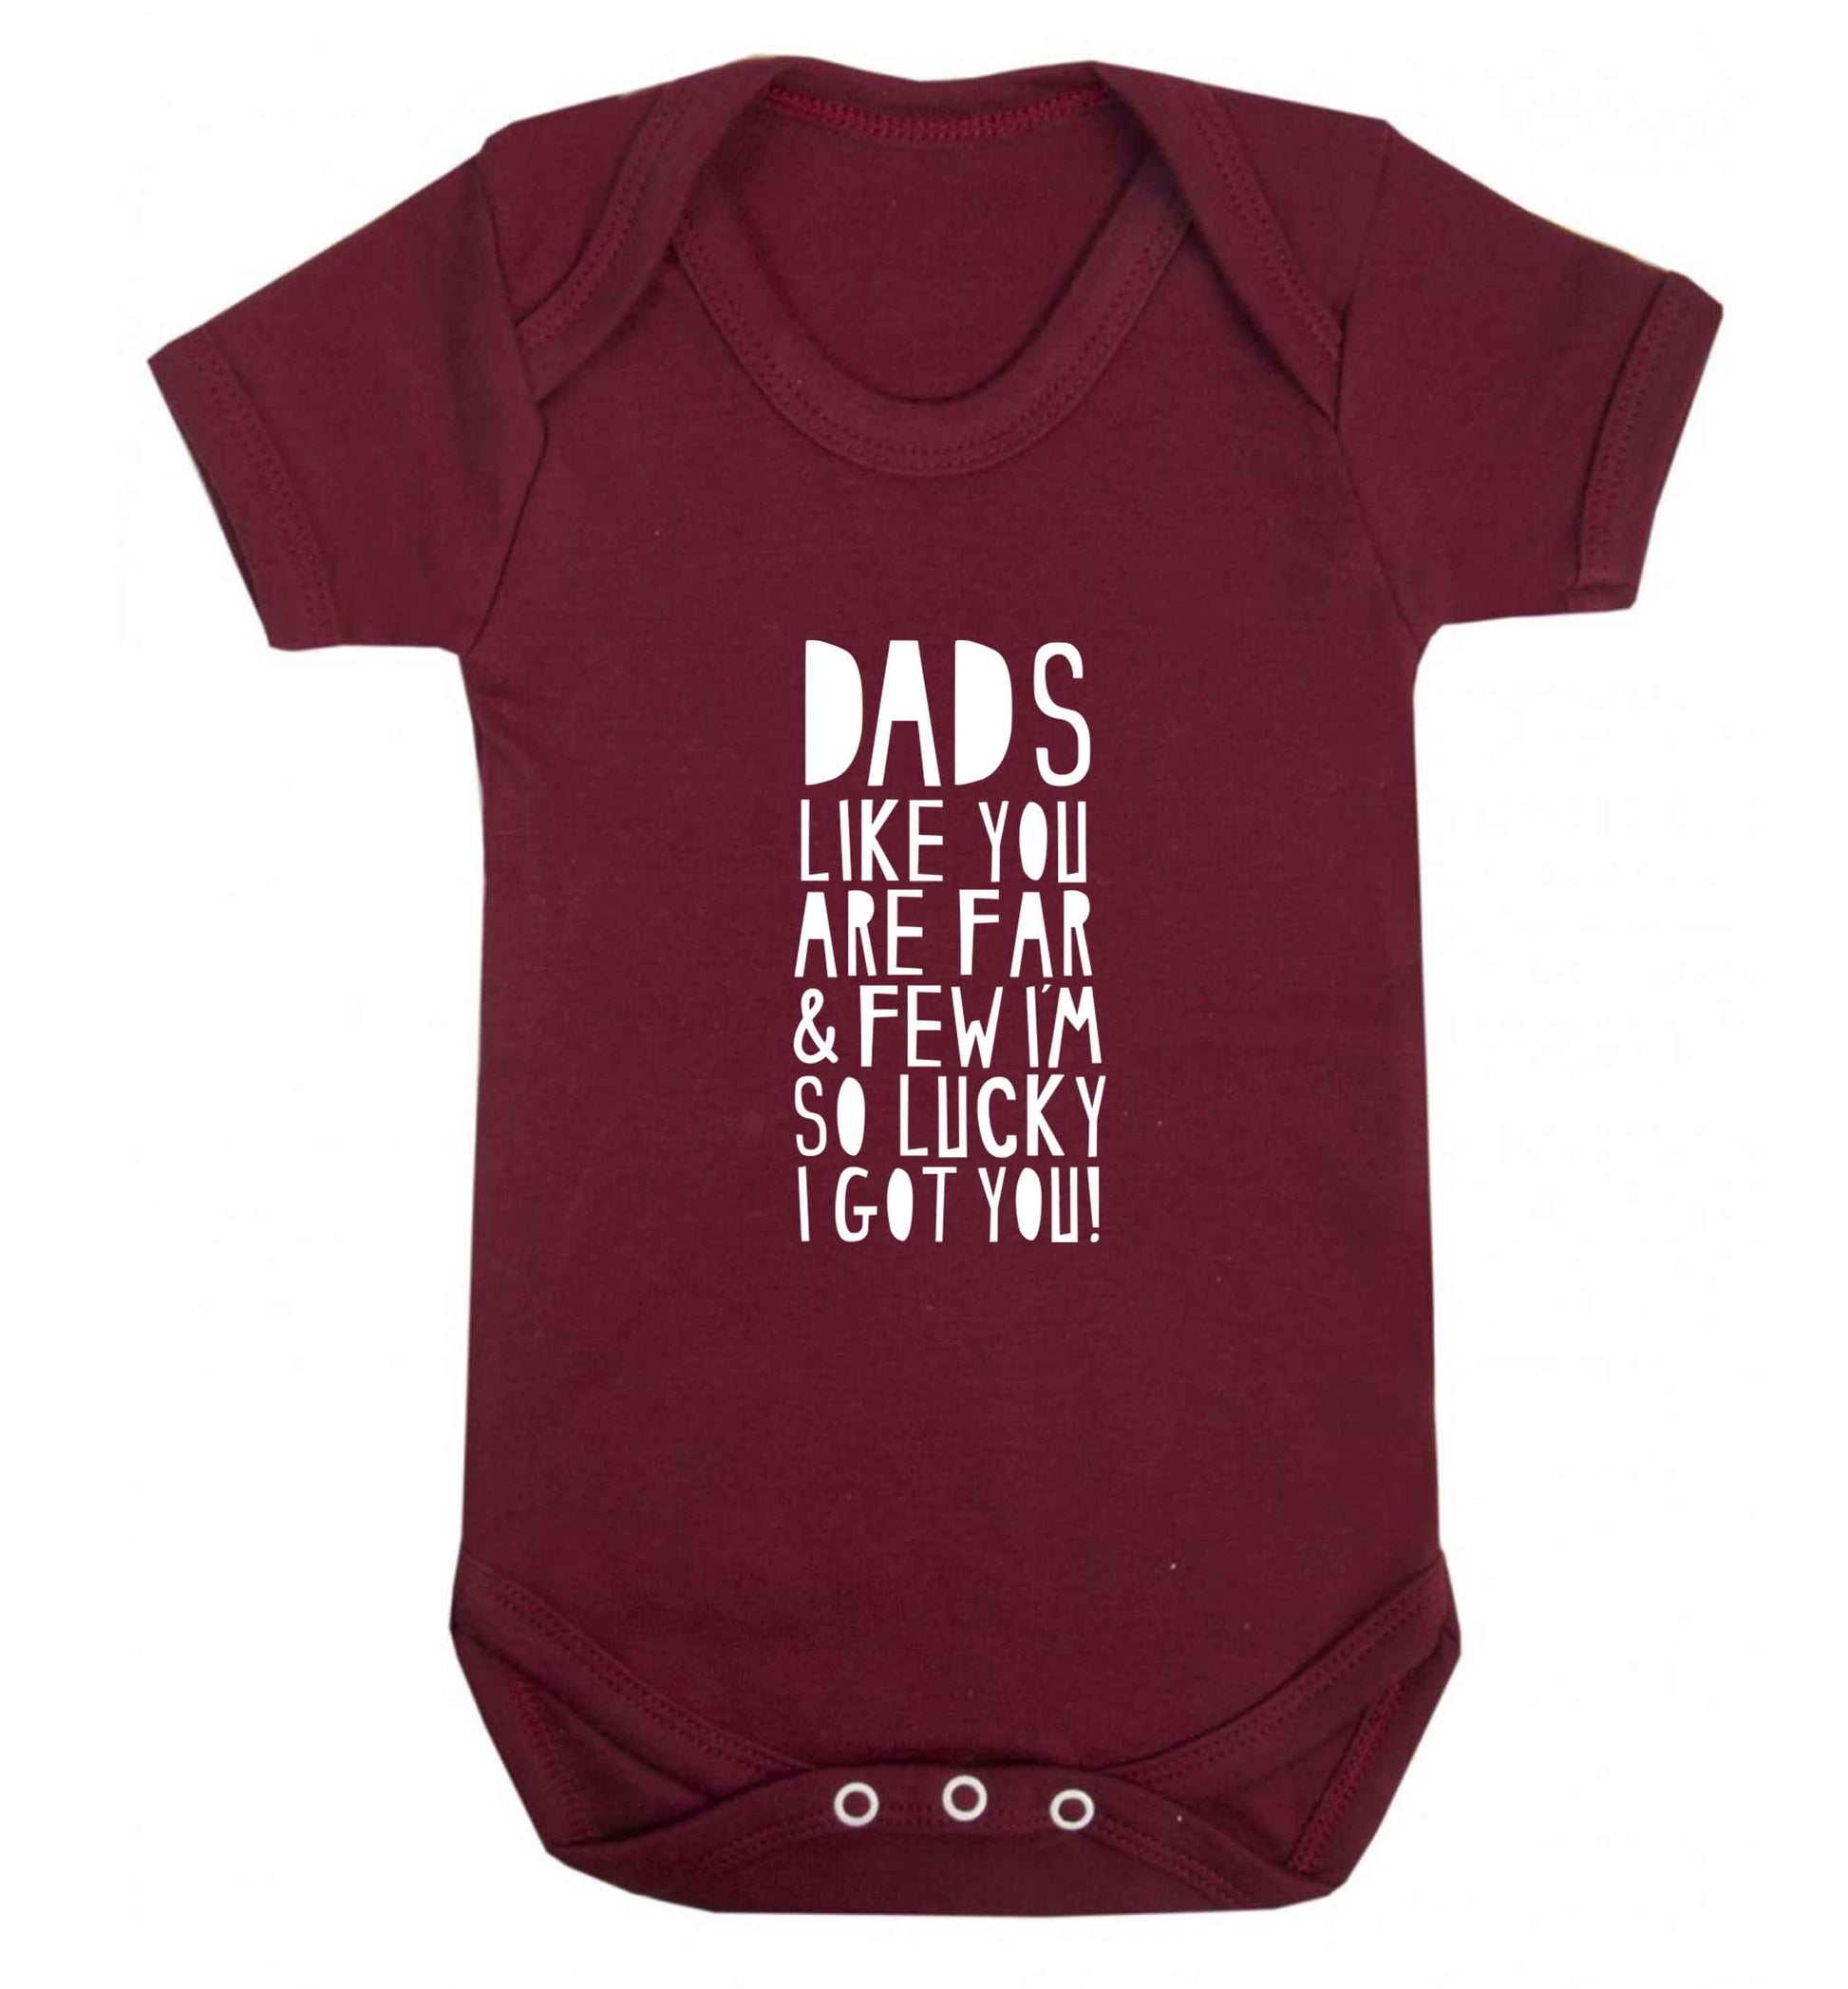 Dads like you are far and few I'm so luck I got you! baby vest maroon 18-24 months